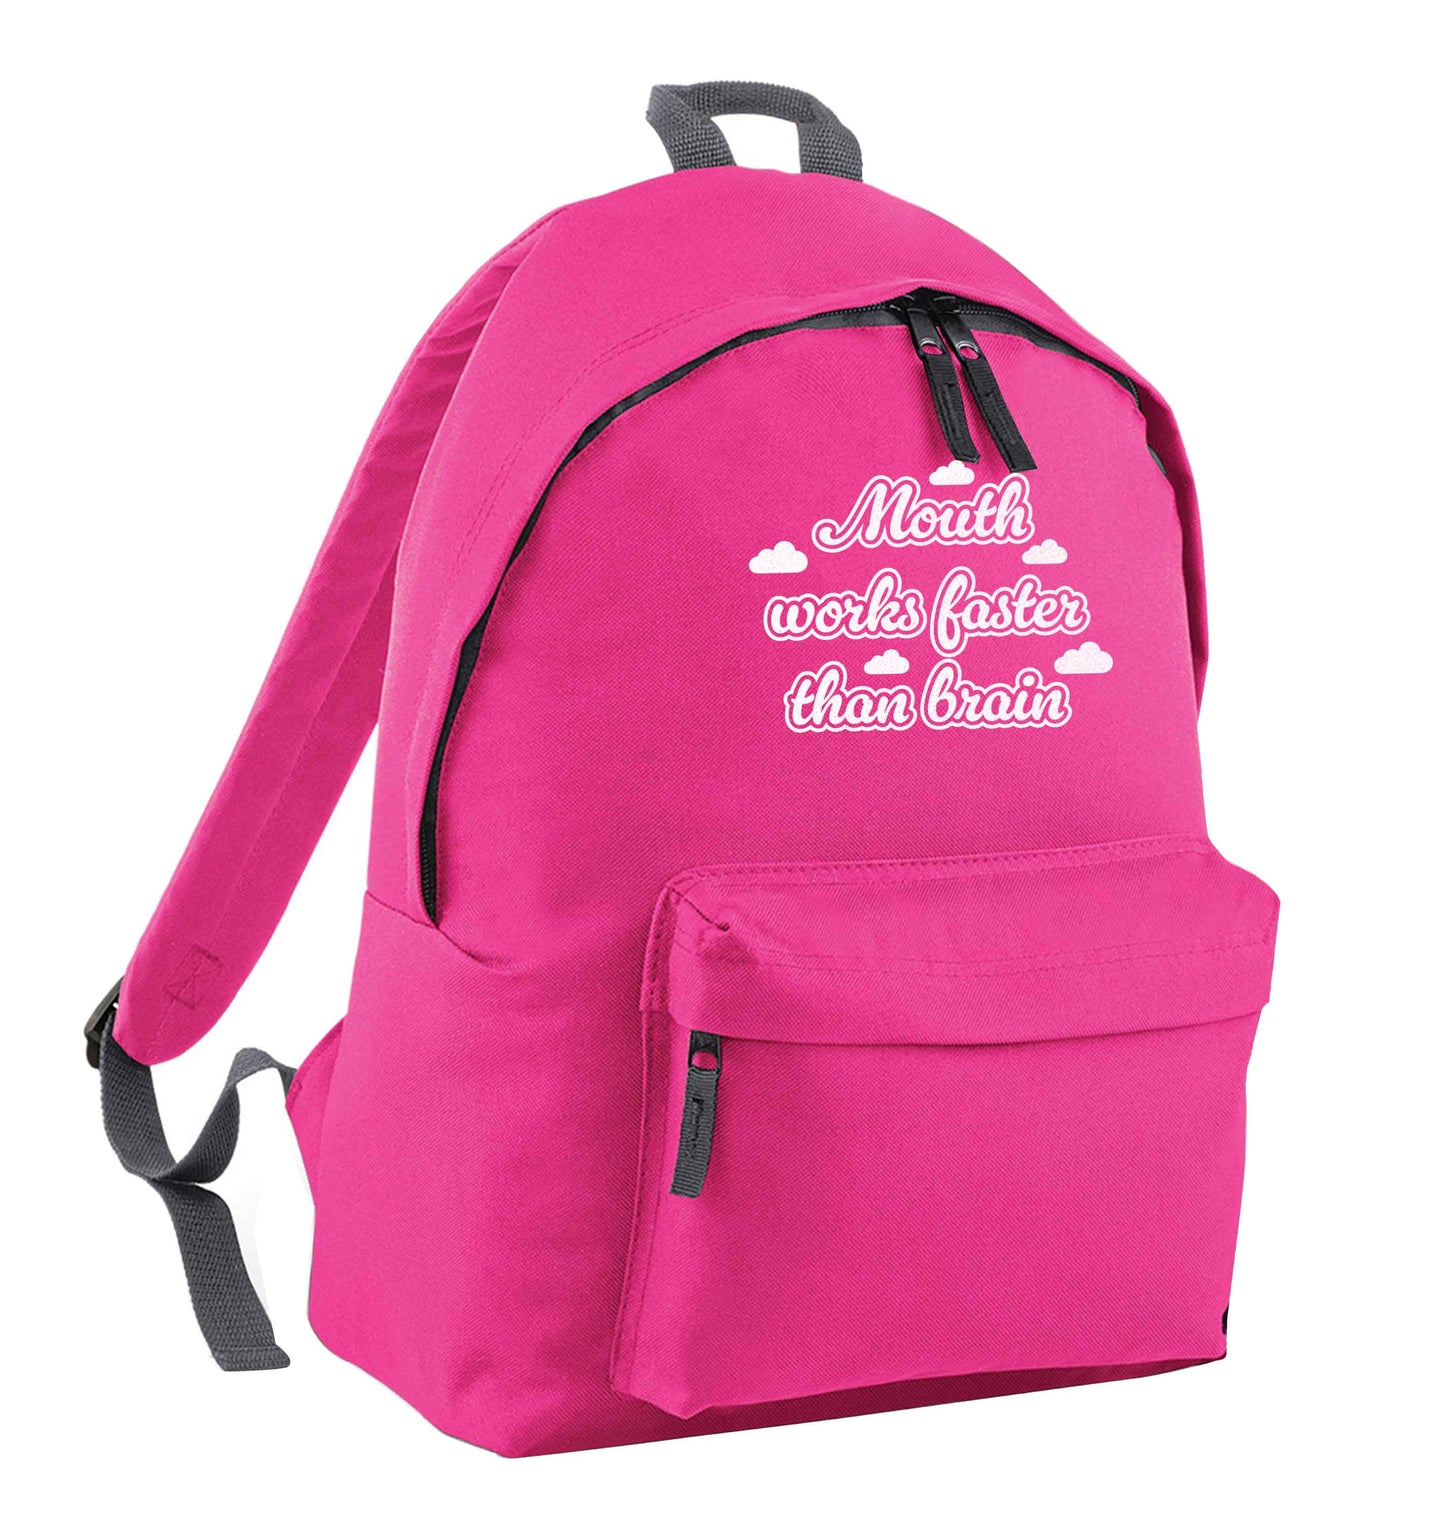 Mouth works faster than brain pink adults backpack